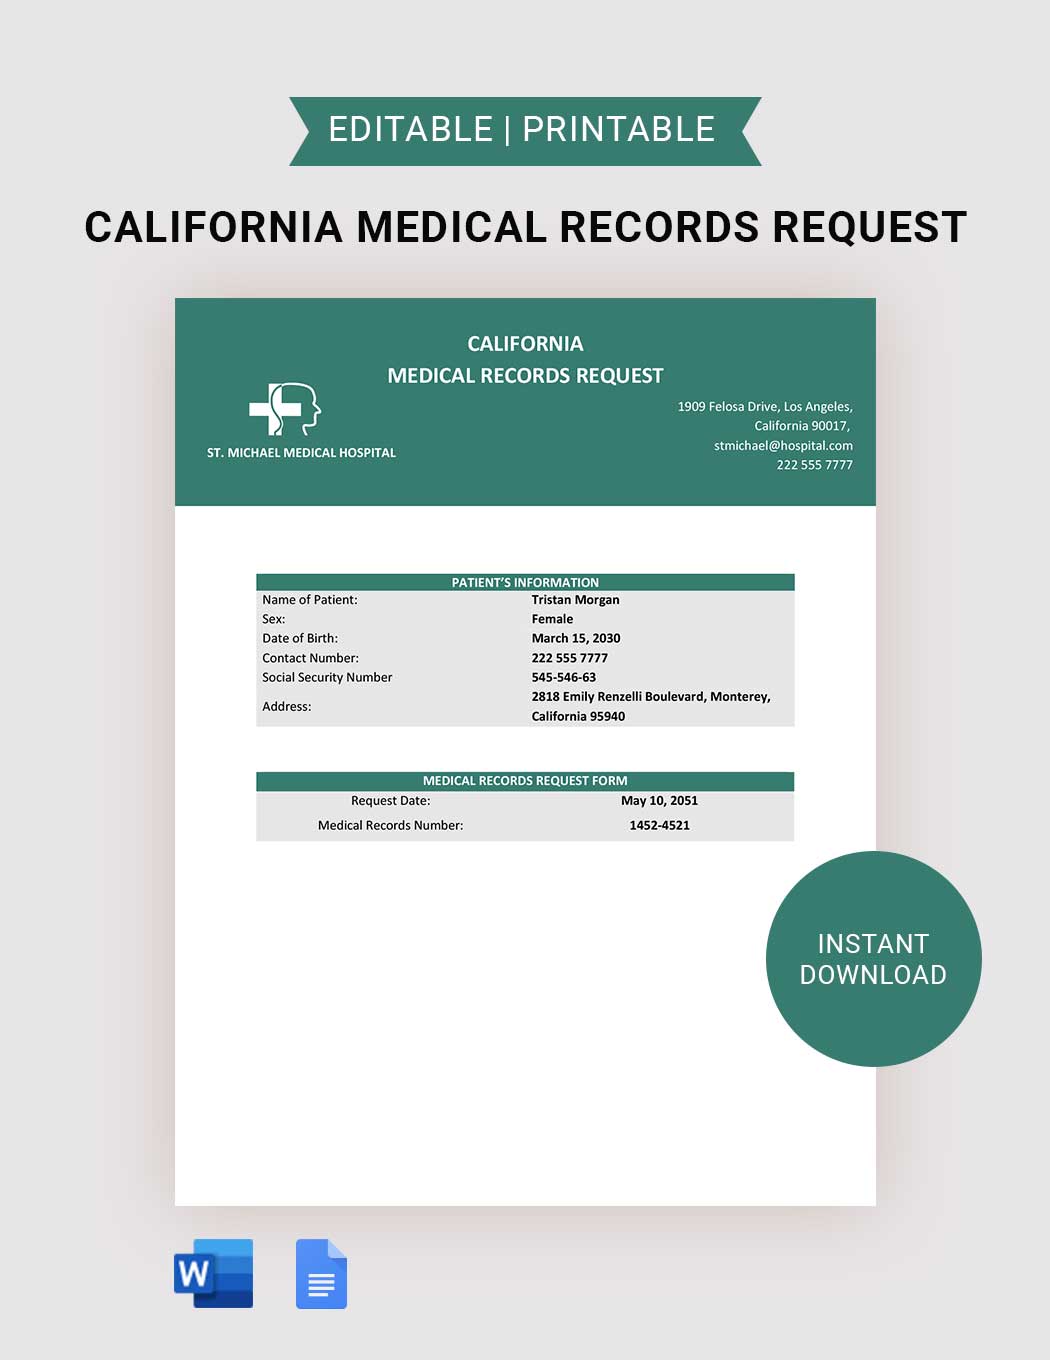 California Medical Records Request Template in Word, Google Docs